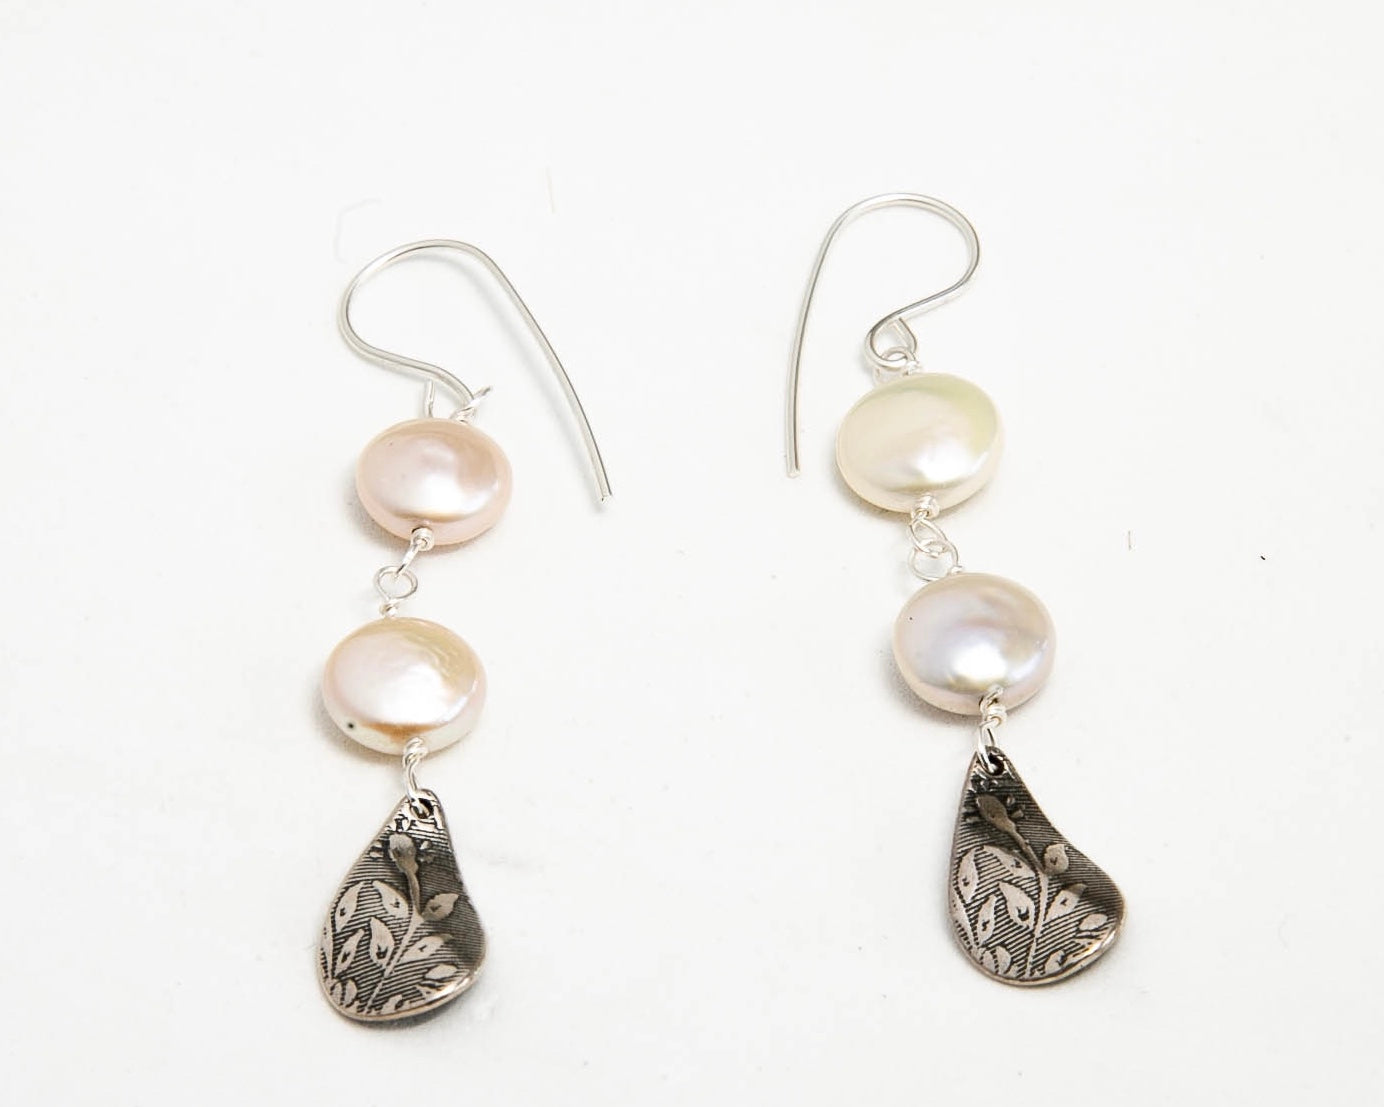 Coins and Leaf Earrings